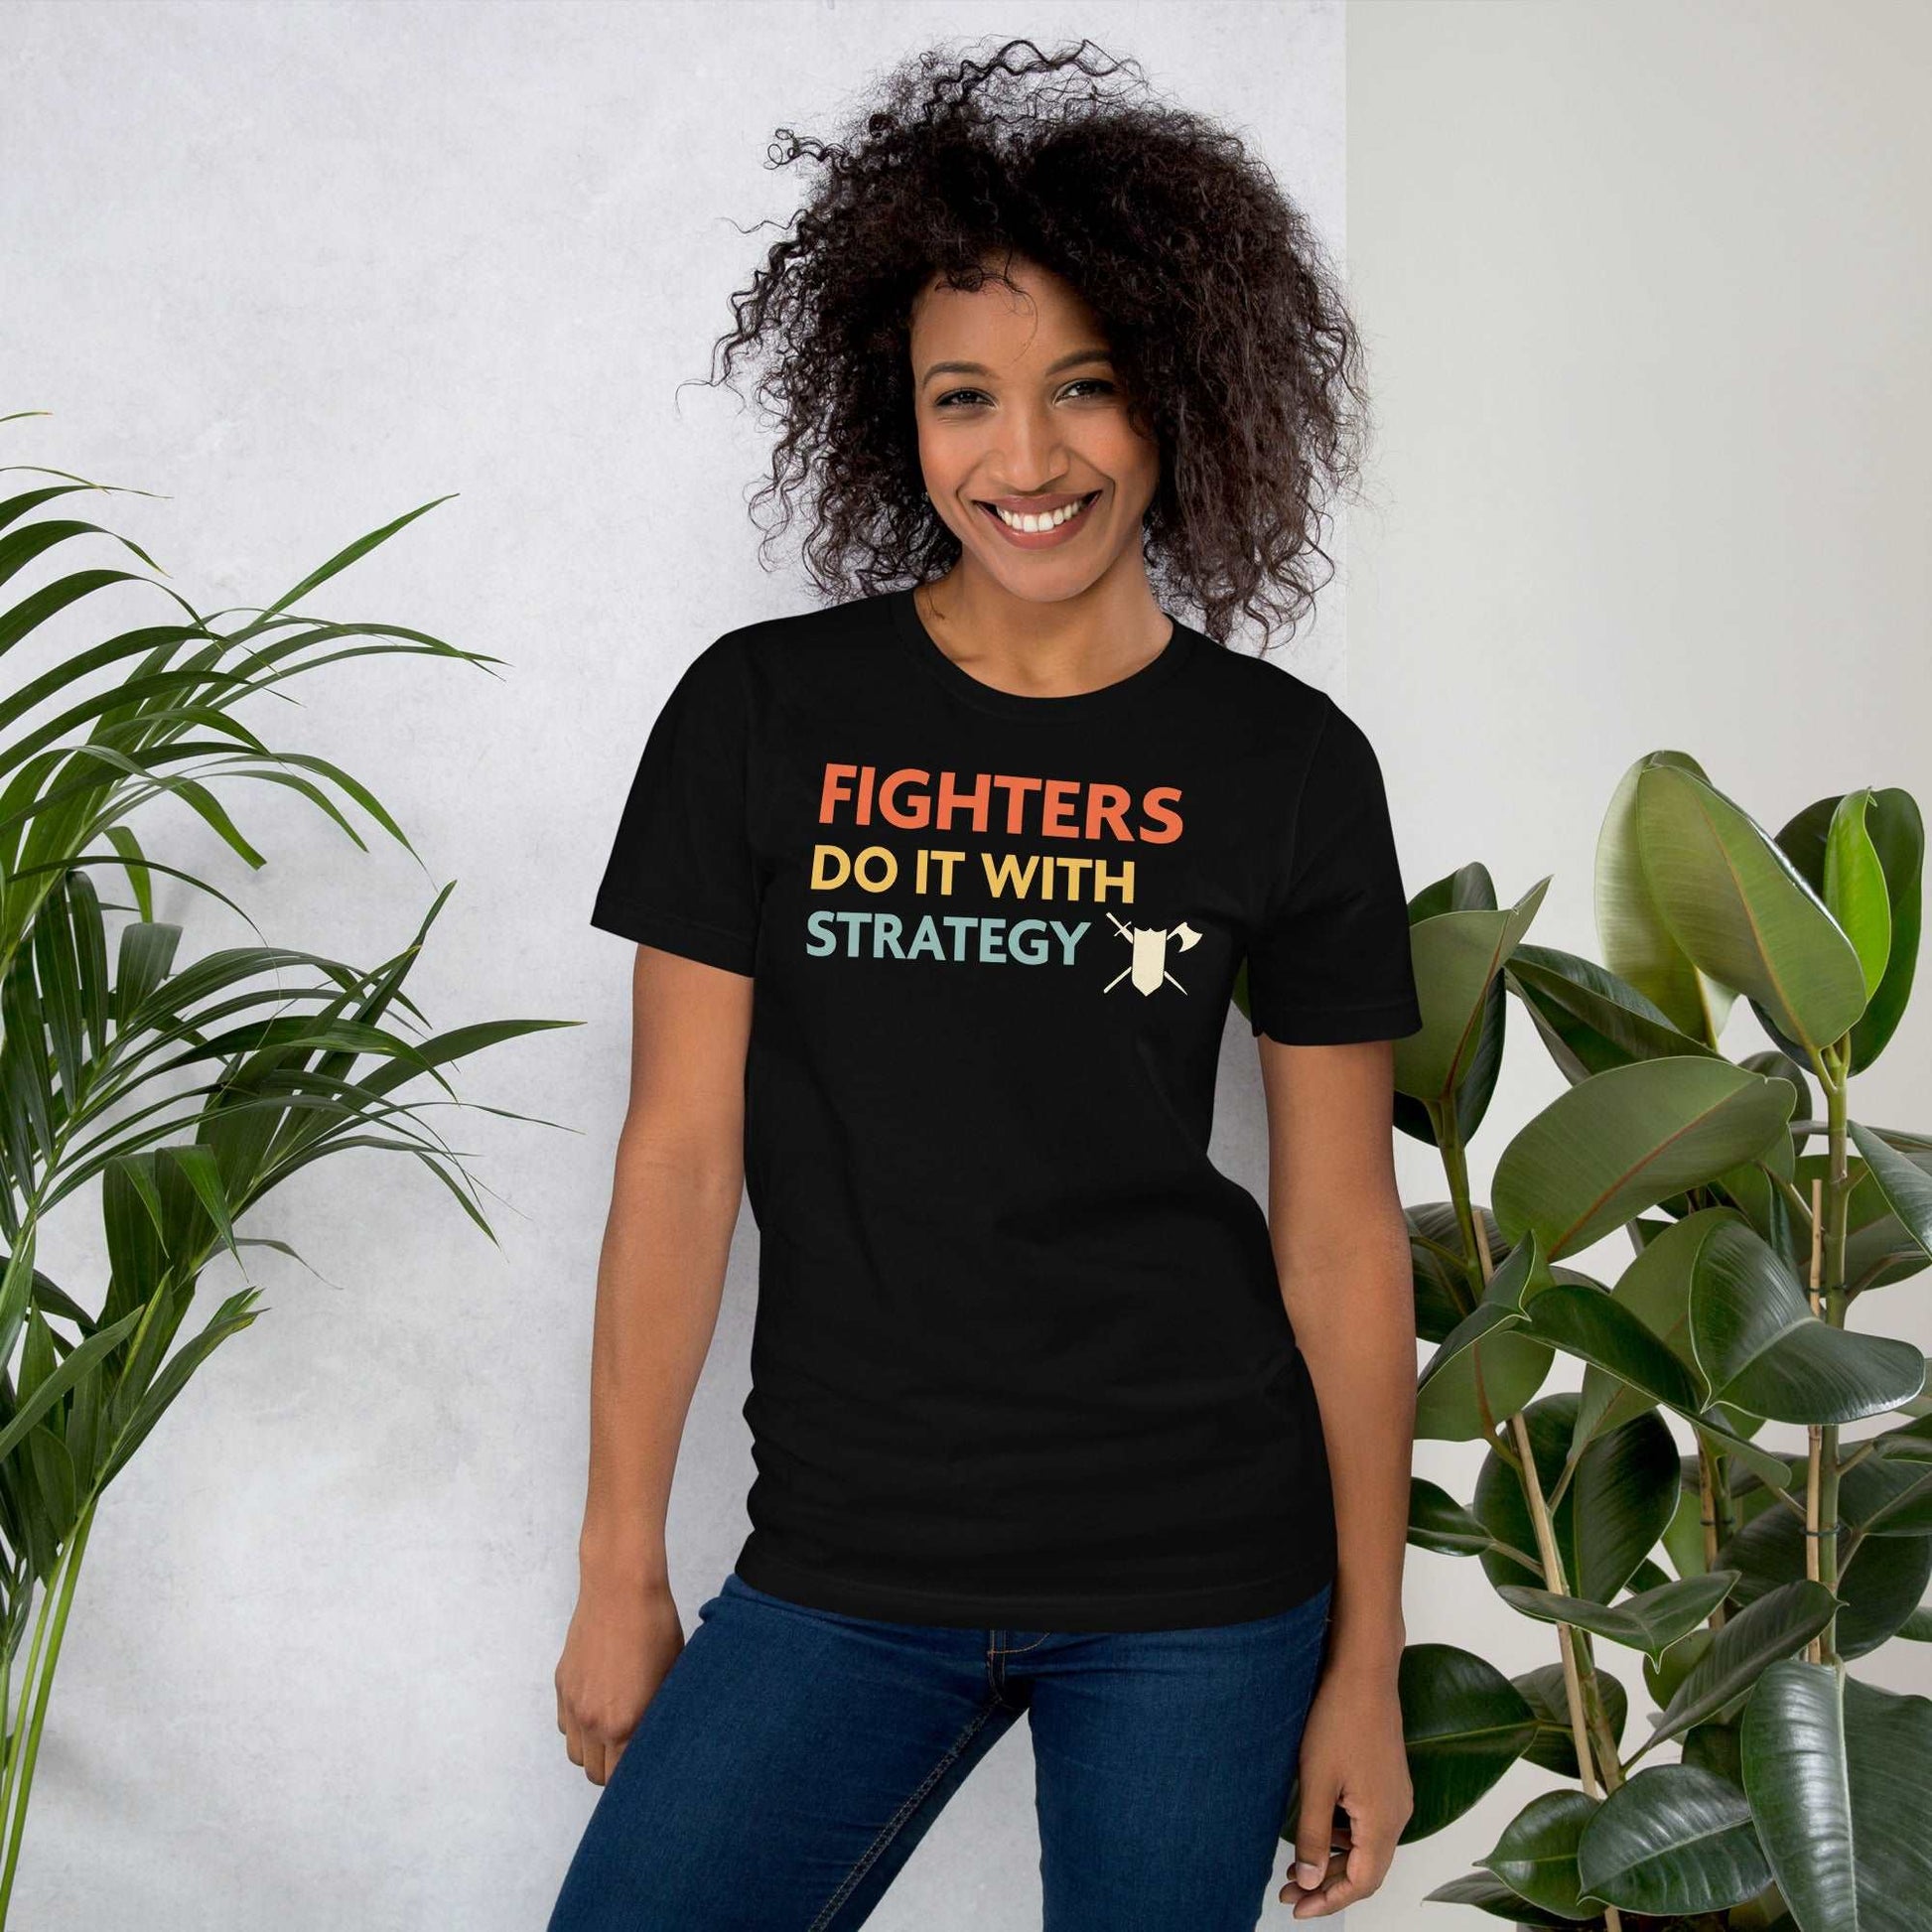 DnD Fighters Do It With Strategy Shirt T-Shirt